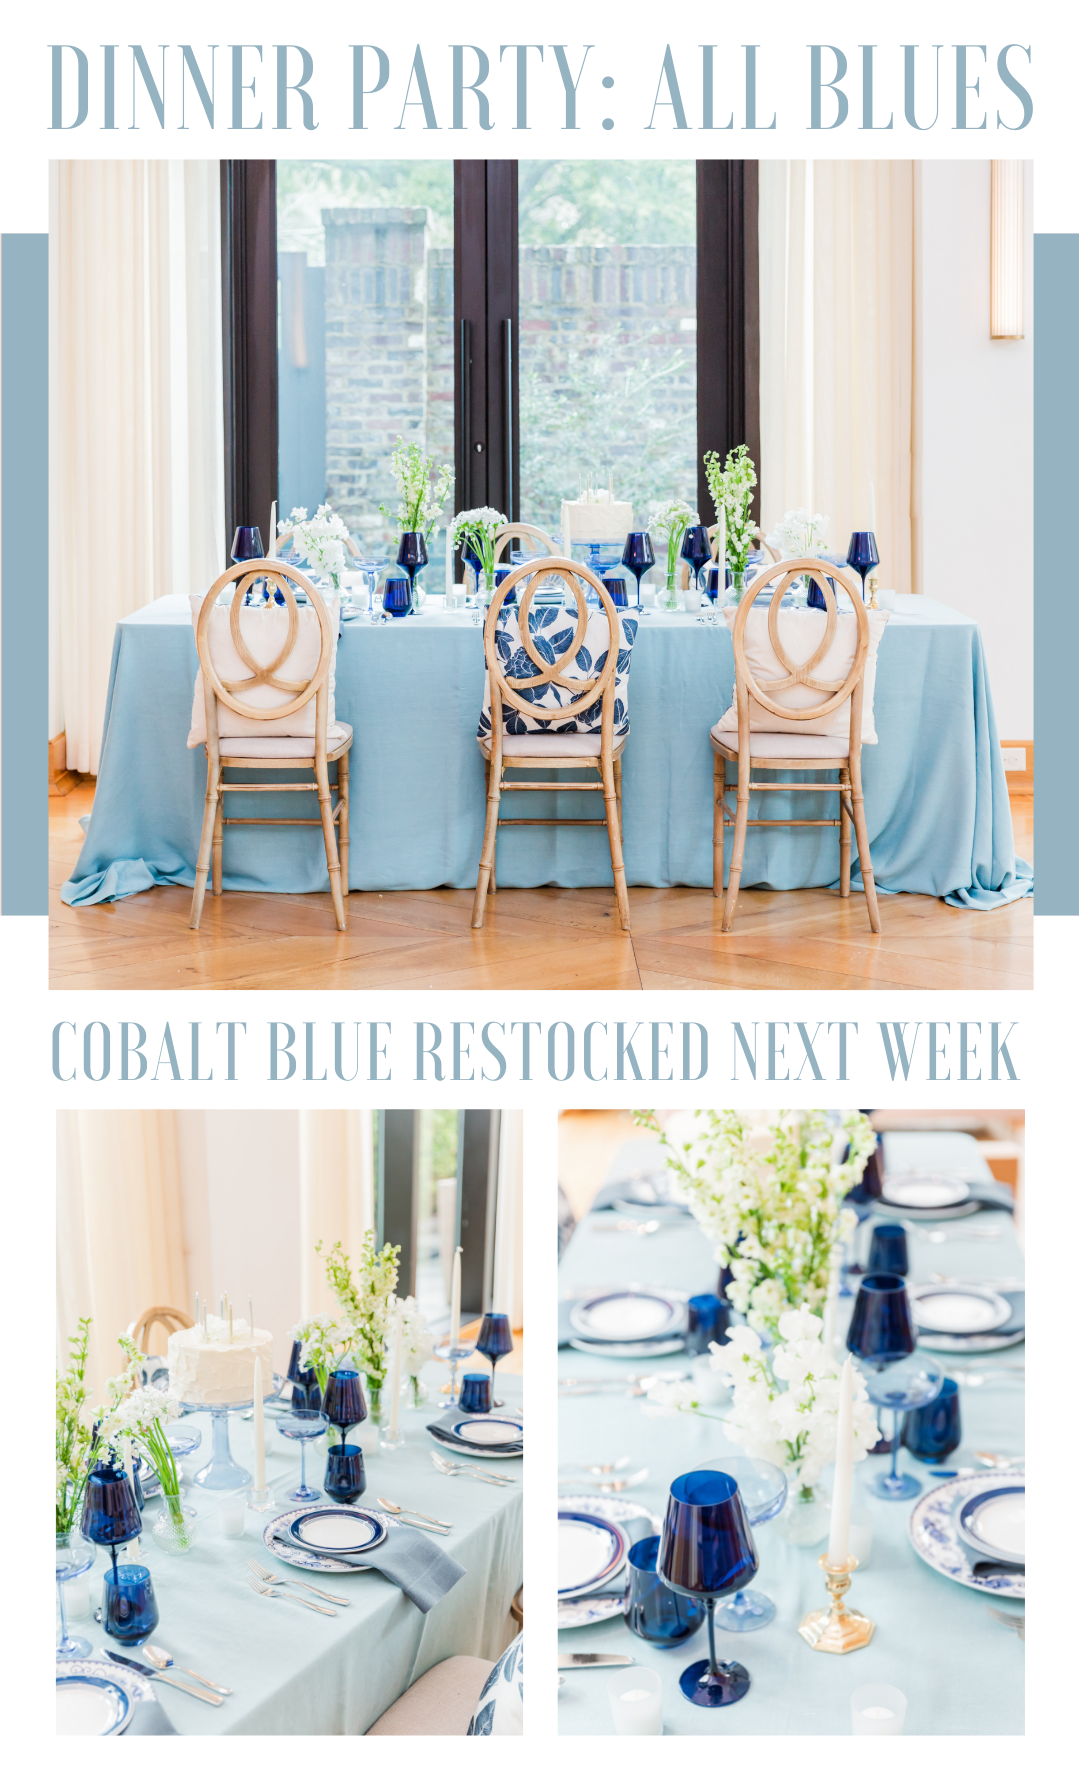 Dinner Party: All Blues